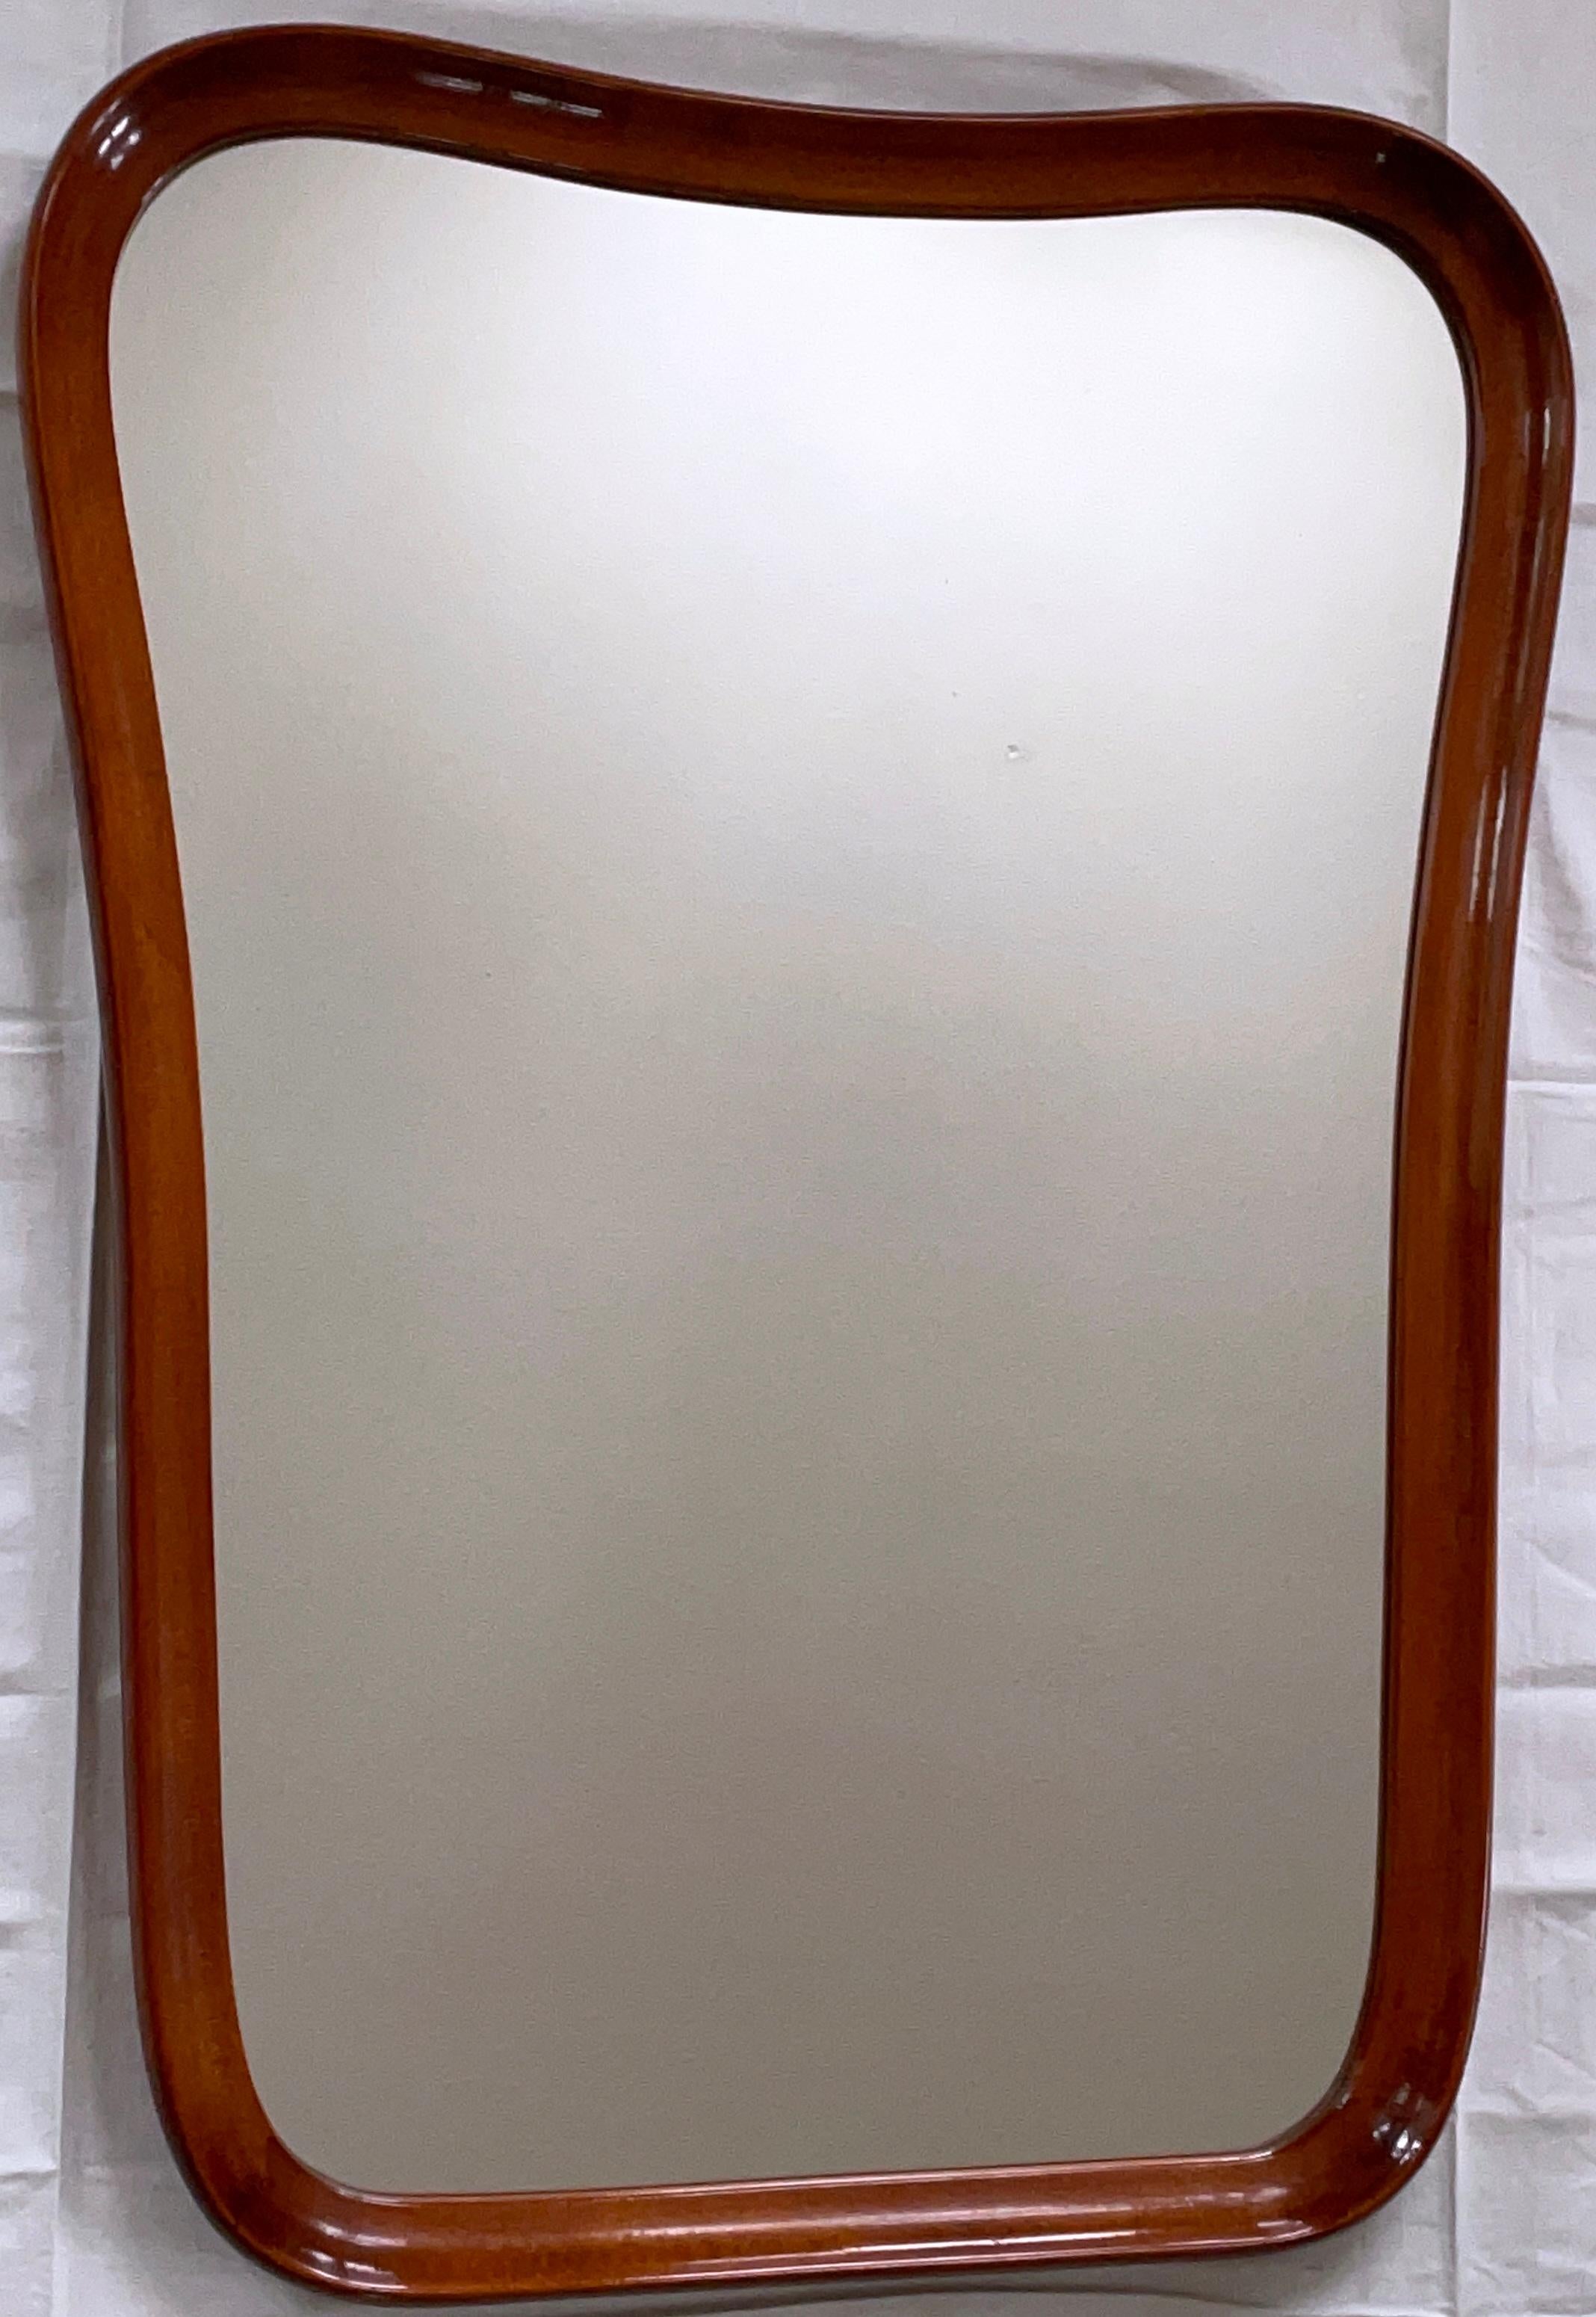 Large sculptural wall mirror produced in Sweden during the 1940s. The mirror frame is stained walnut wood and made with curvy sculptural lines. Very good vintage condition with no scratches on the glass and the frame in excellent condition.